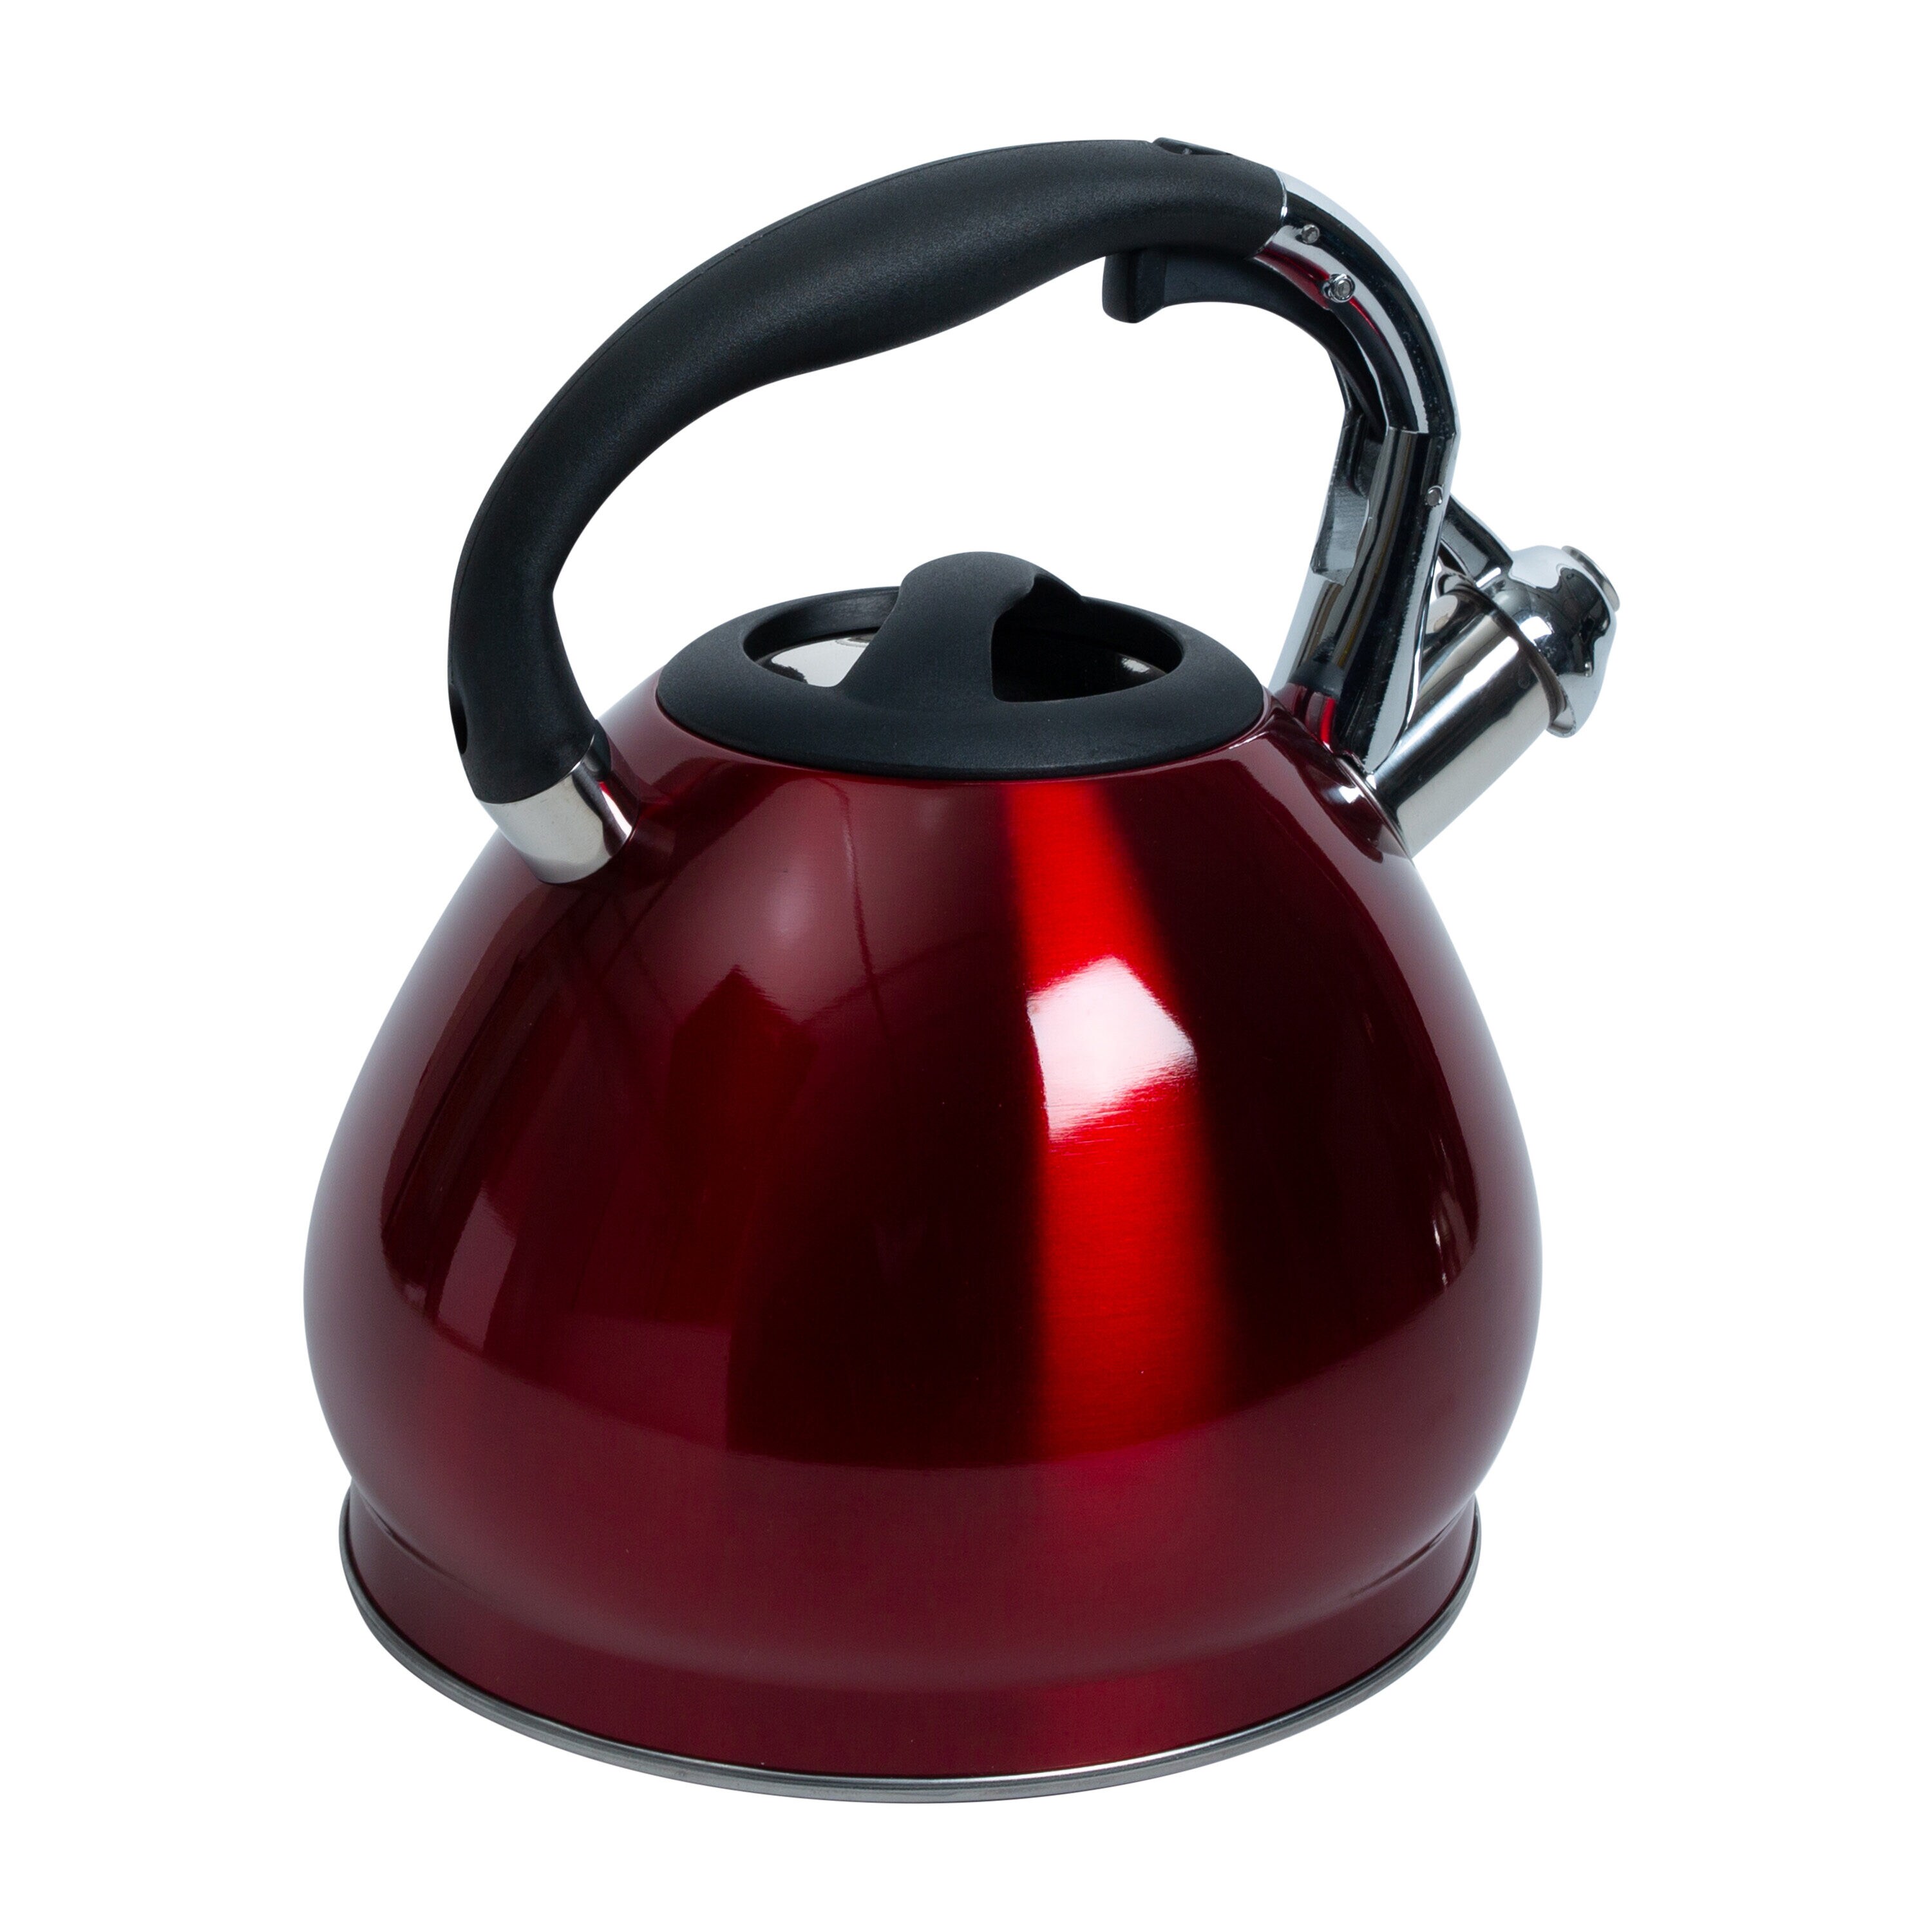 J&V Textiles 10-Cup Stainless Steel 2.5 qt. Whistling Tea Kettle | 885